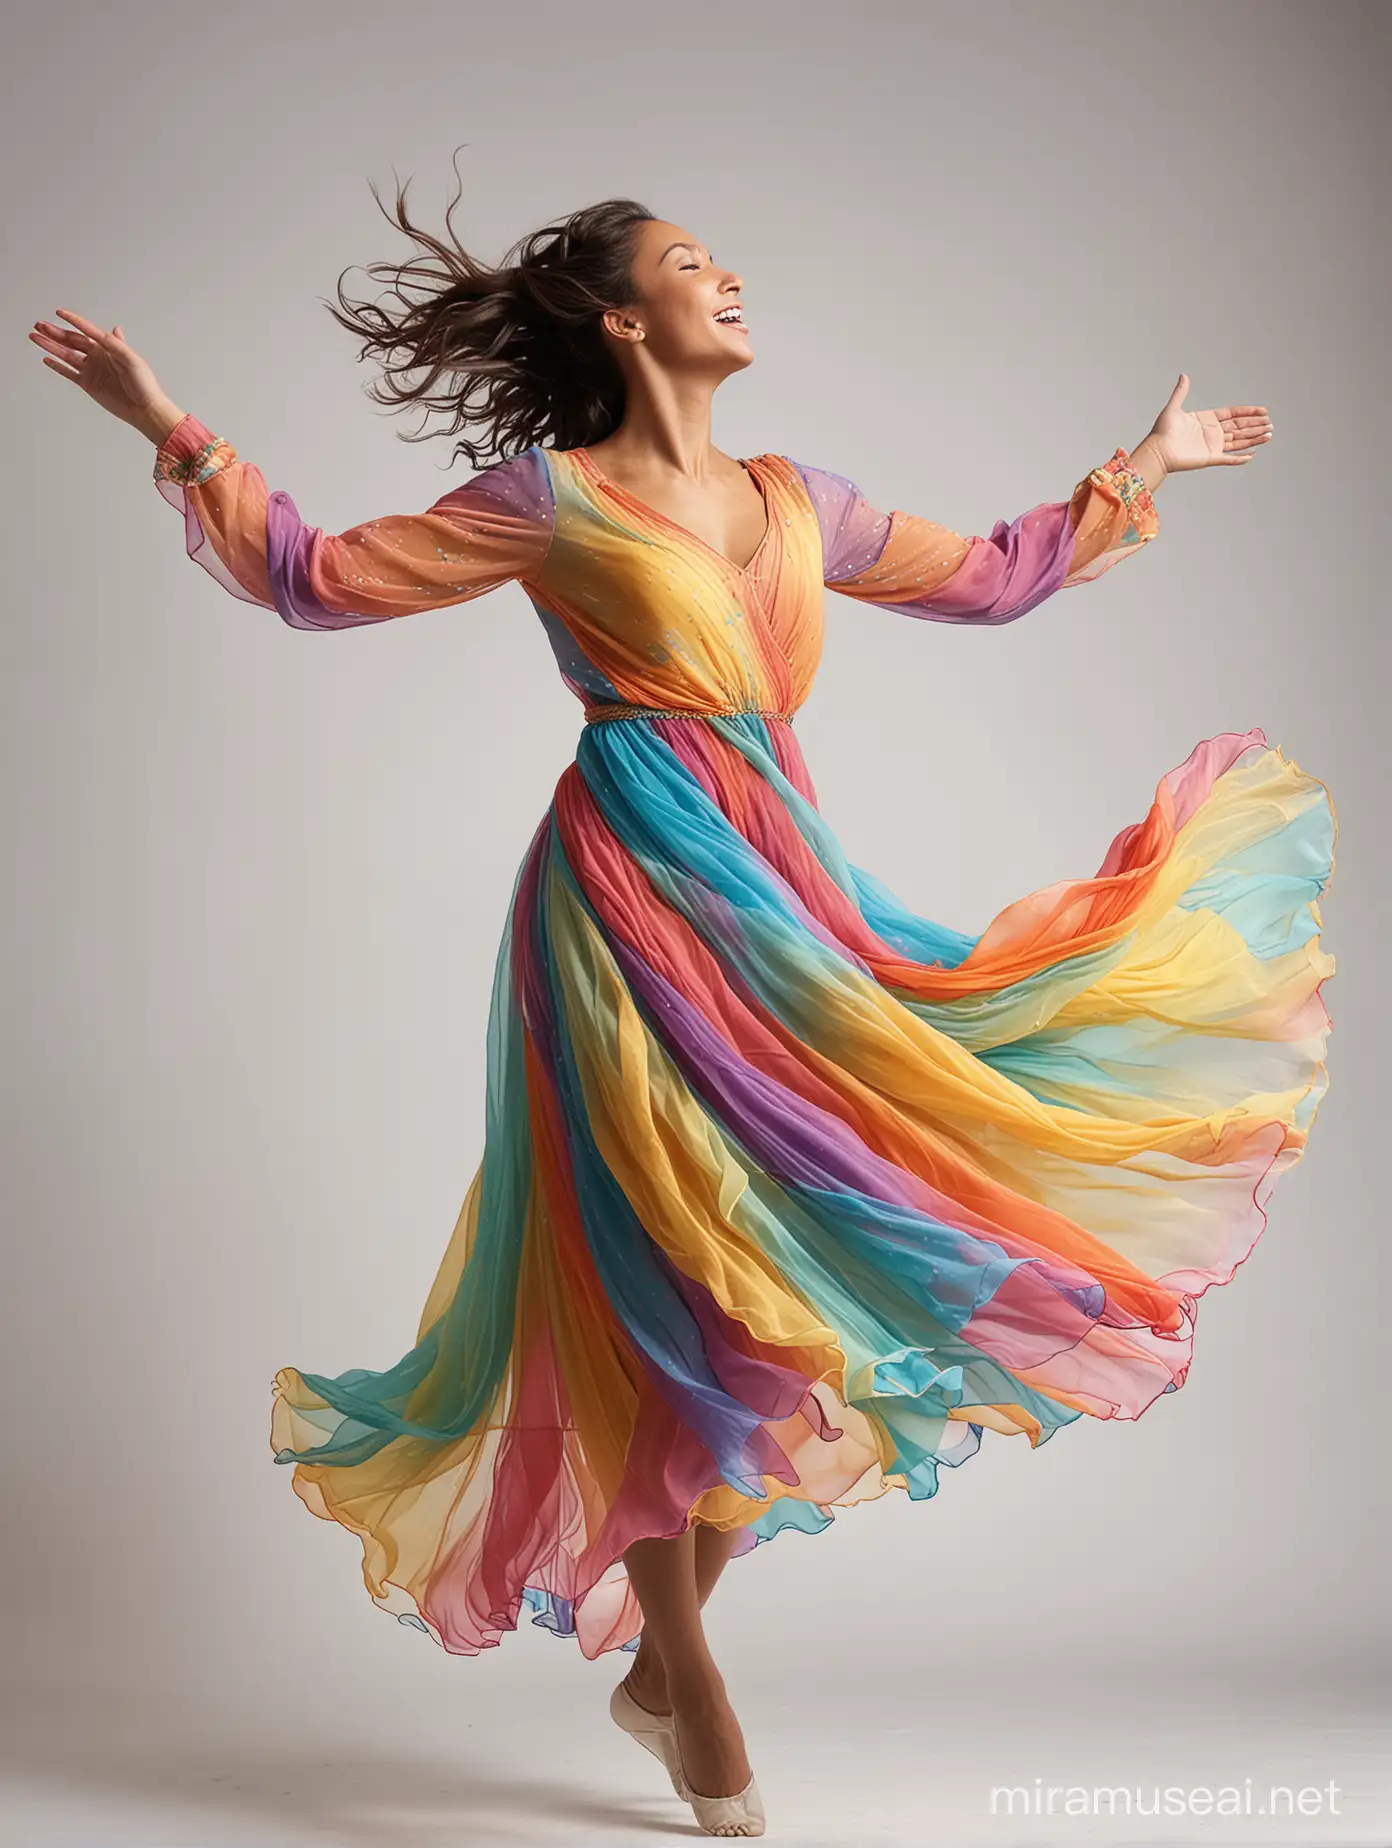 Colorful Chiffon Praise Dancer Leaping in Air